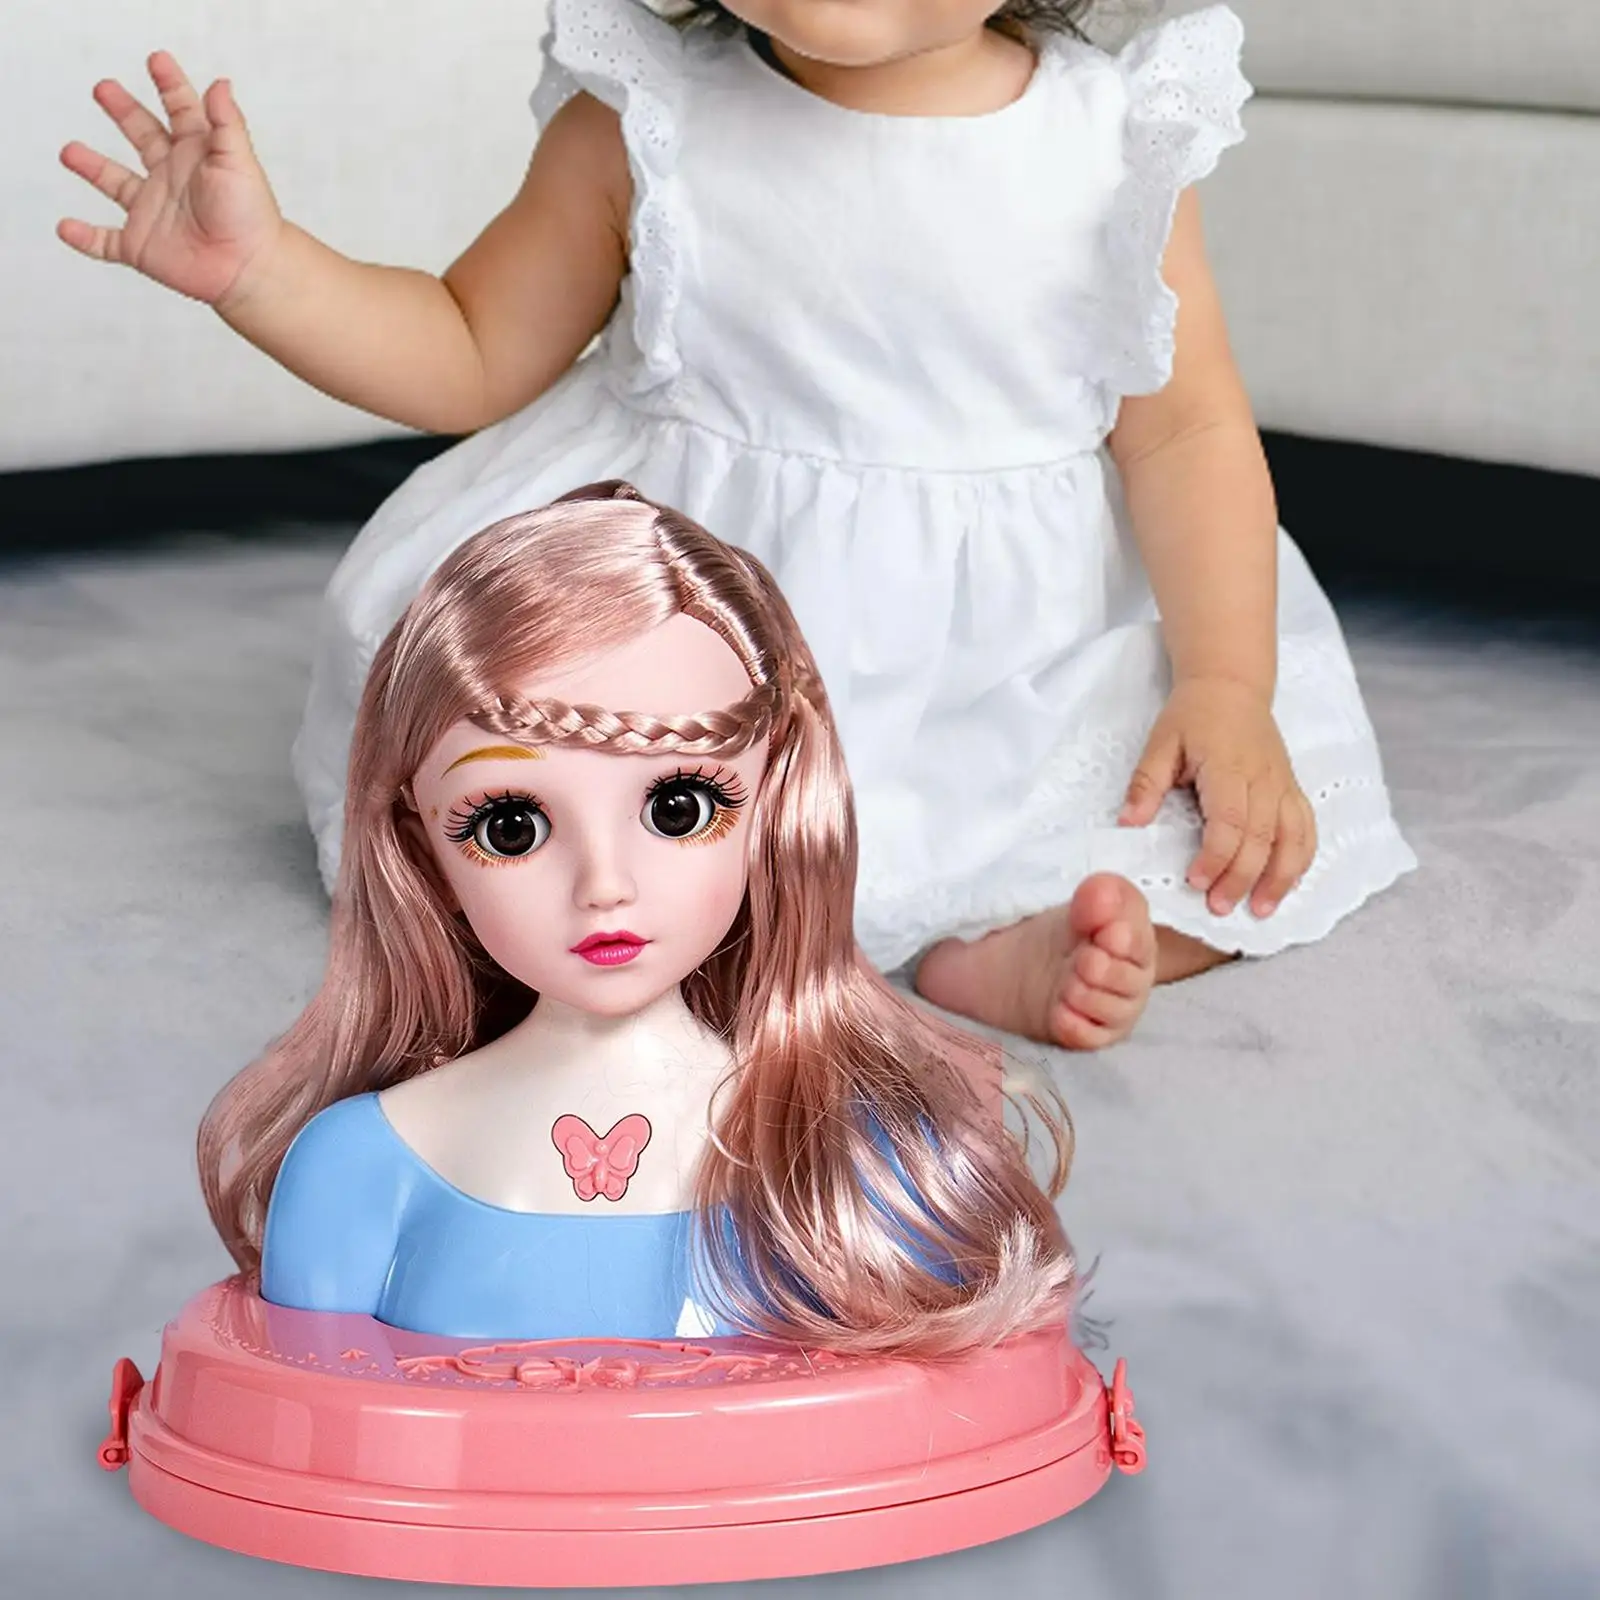 Doll Styling Head Toy Movable Eyelids Doll Hair Styling Toy Princess Doll for Adults Girls Children Kids Birthday Gifts